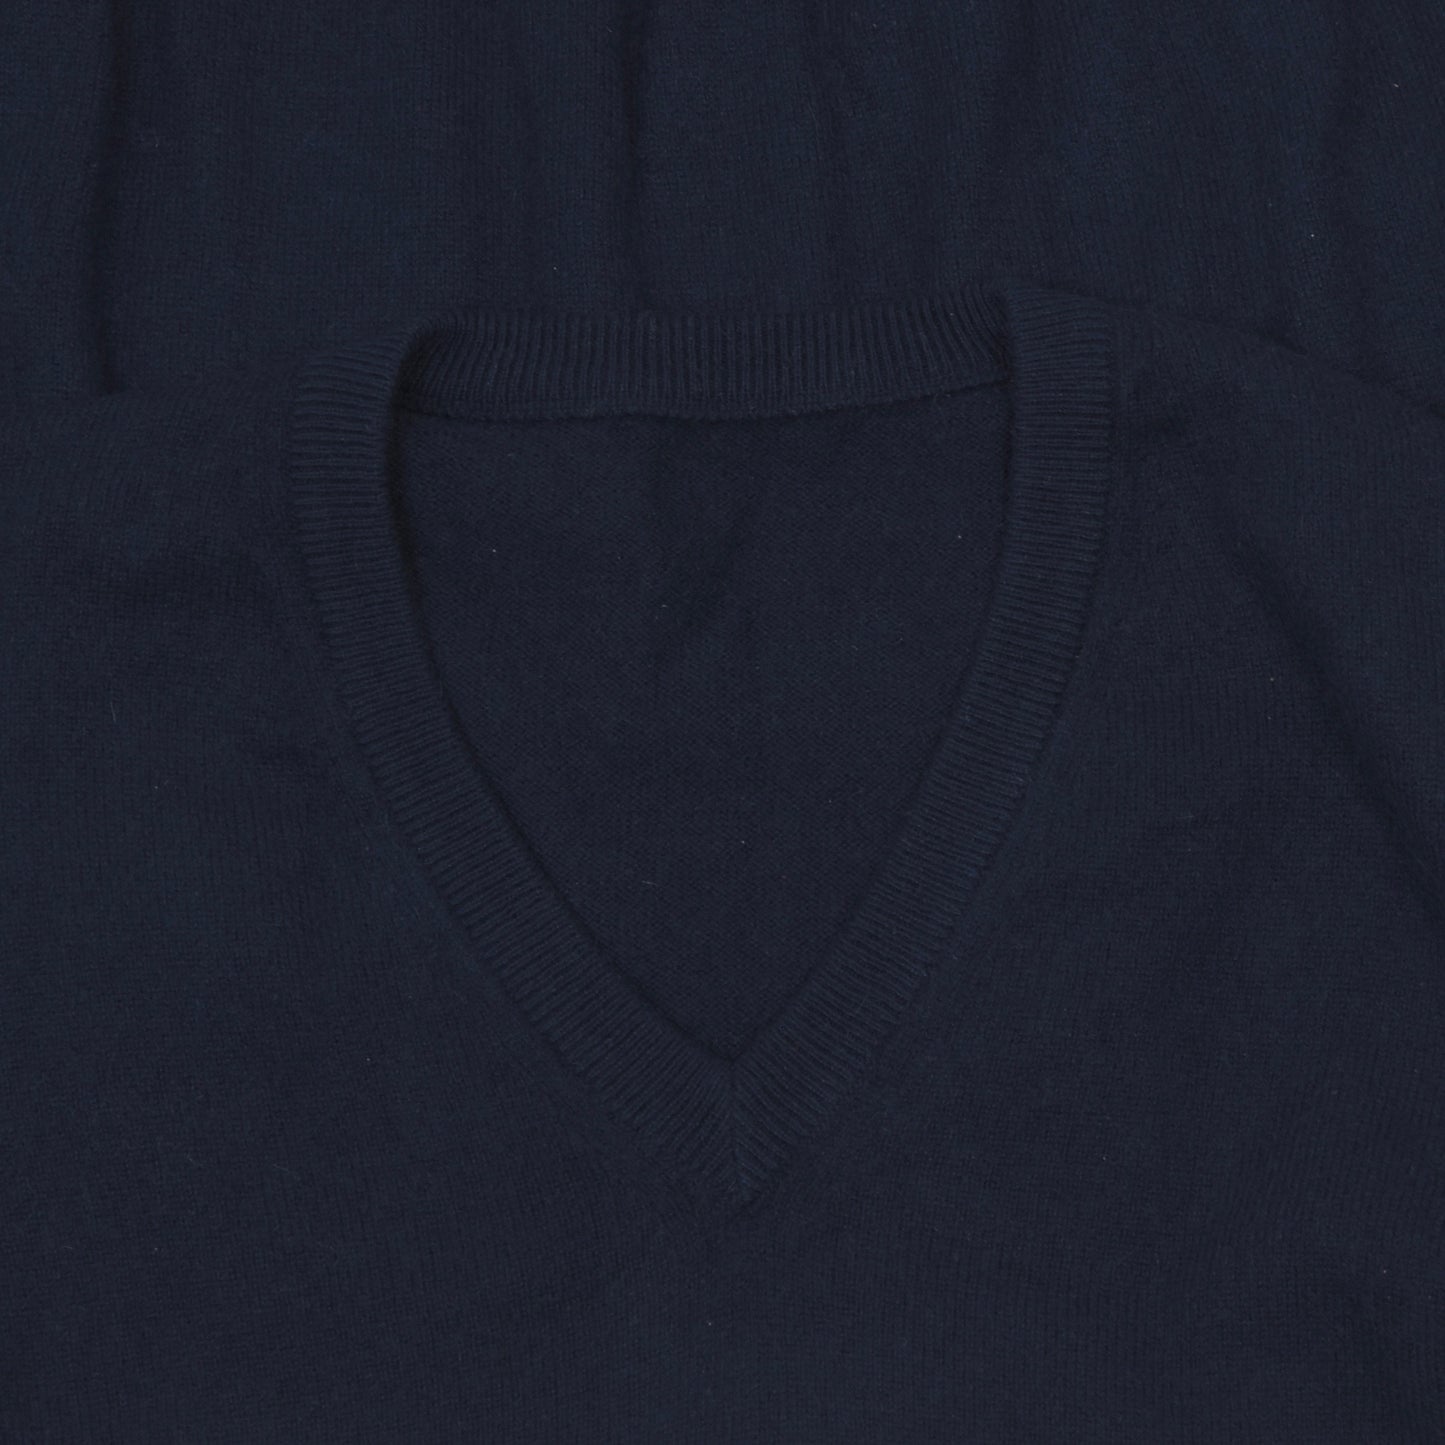 Anonymous 100% Cashmere V-Neck Sweater Size 50 - Navy Blue